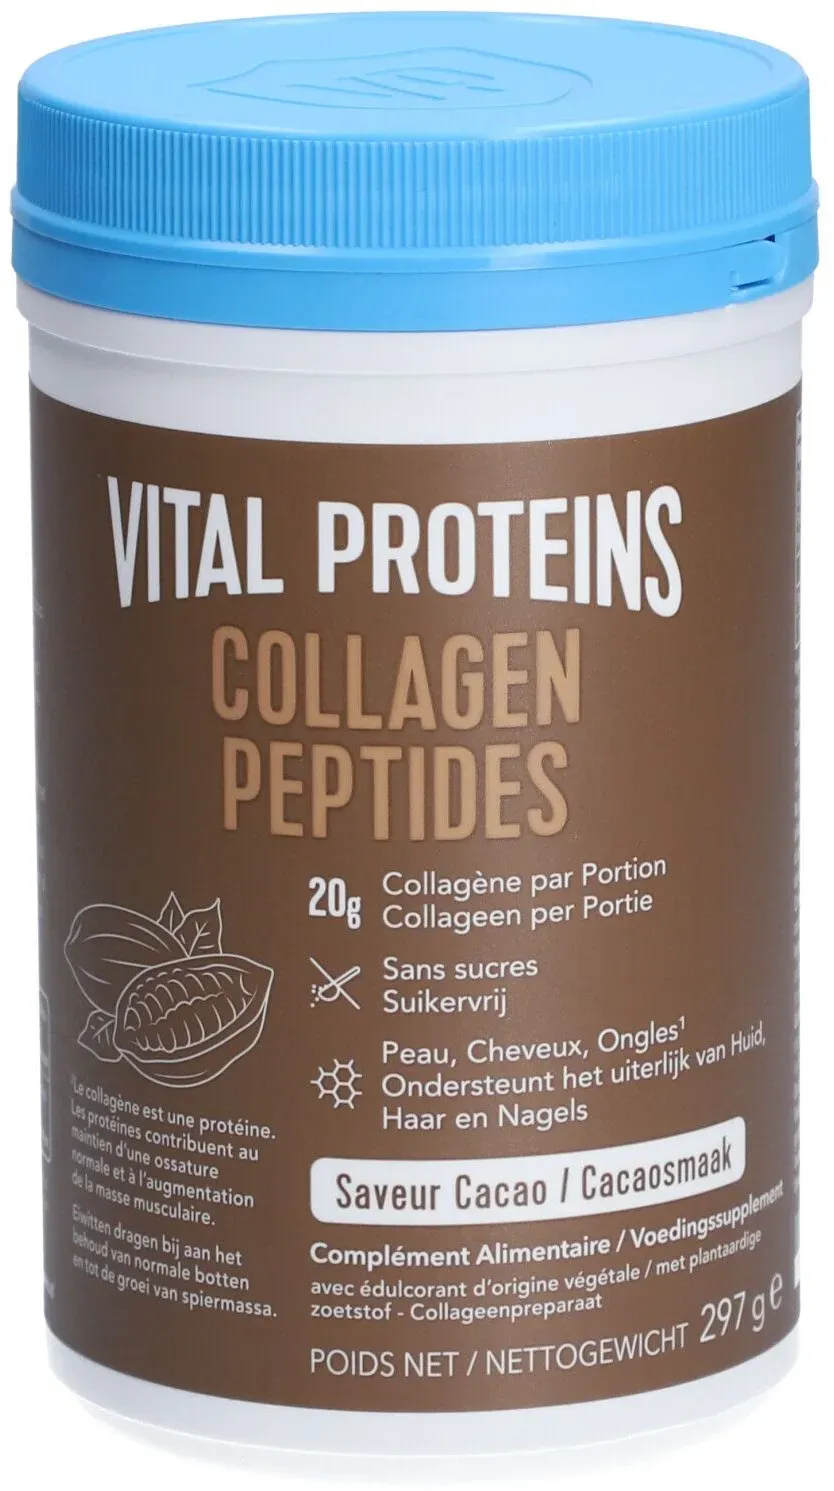 VITAL PROTEINS Collagen Peptides Saveur Cacao g Poudre